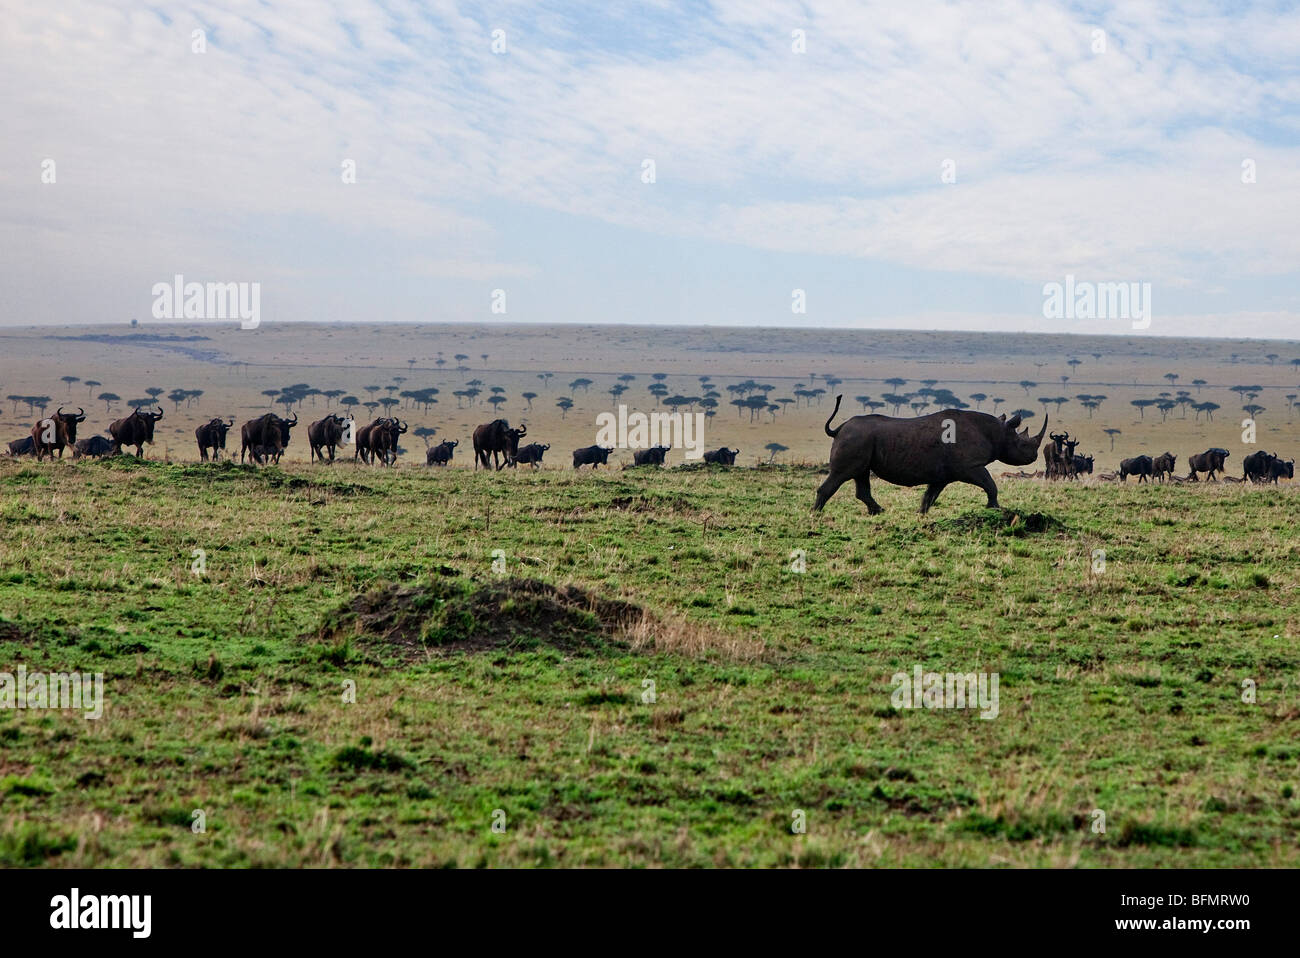 Kenya. A black rhino passes curious wildebeest on the plains in Masai Mara National Reserve. Stock Photo